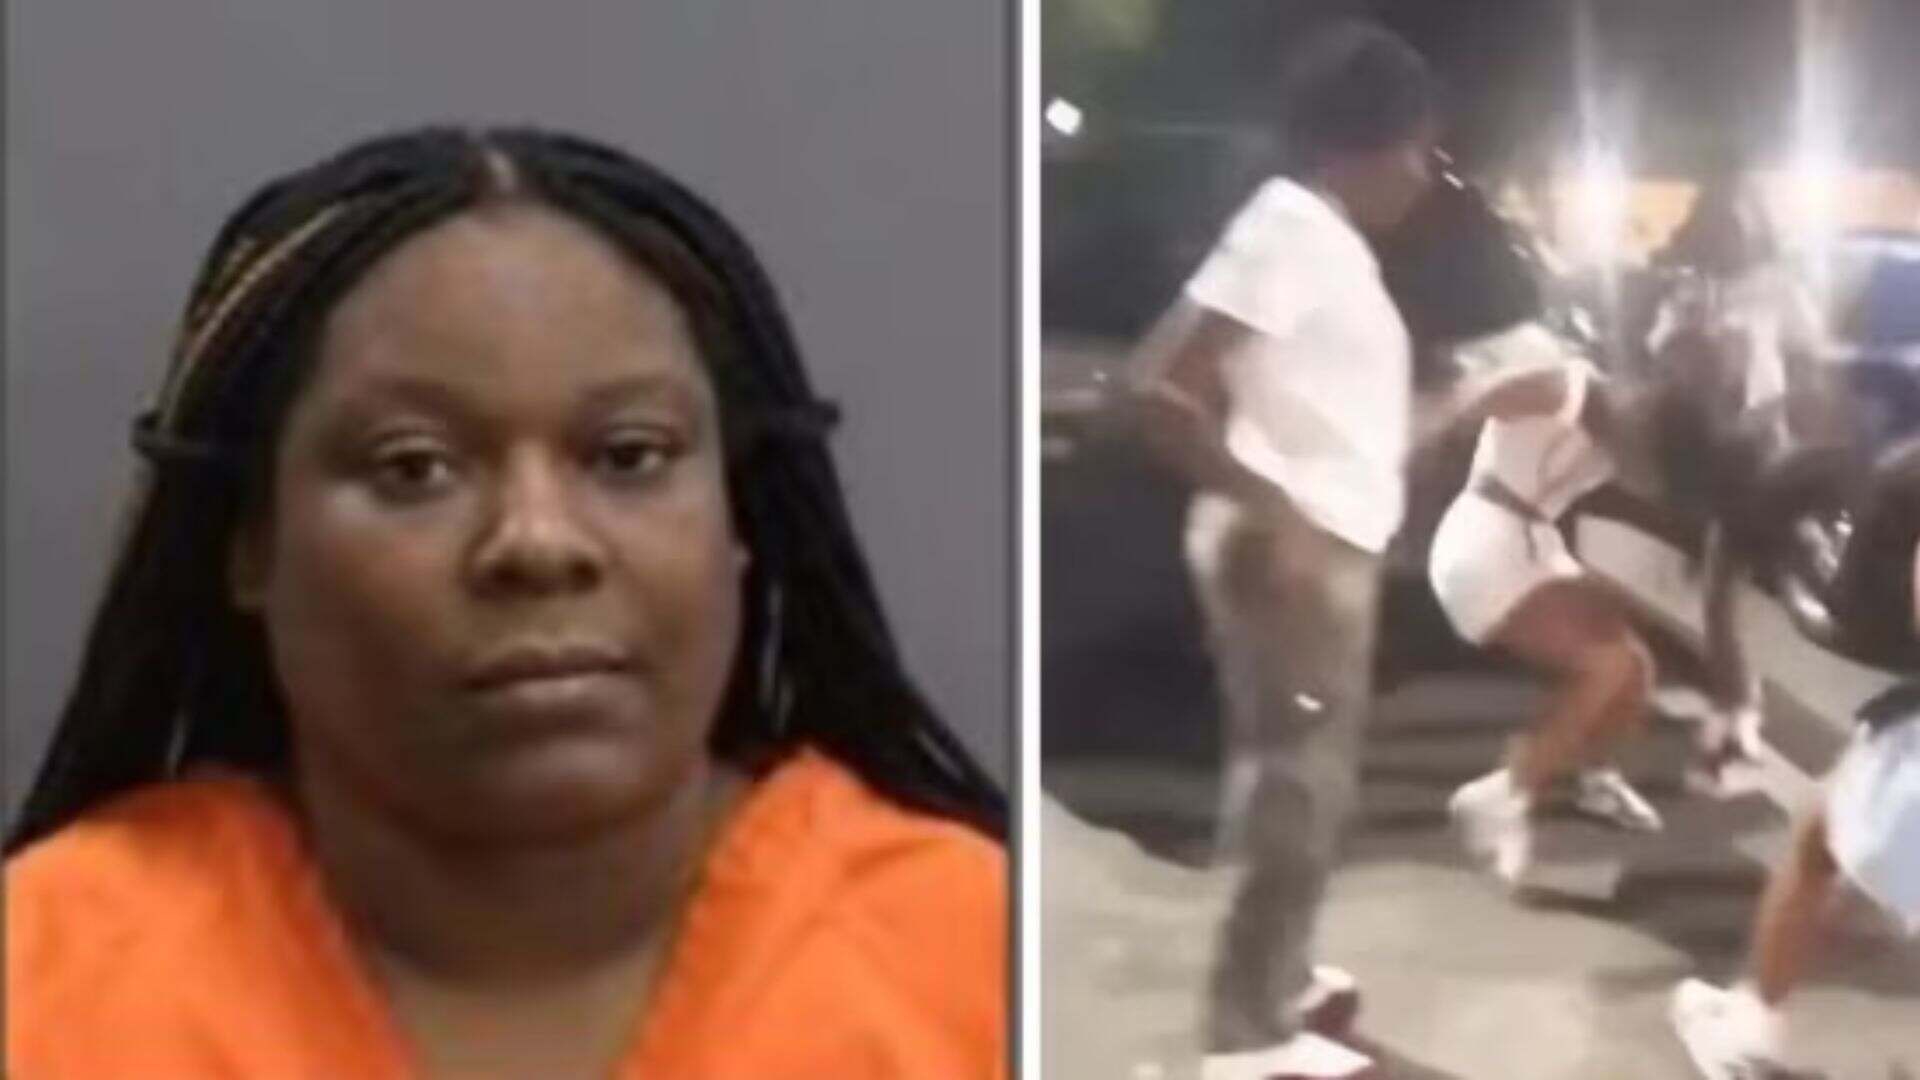 USA: Florida Woman Detained For Provoking Riots Over Child’s Cancelled Birthday Party